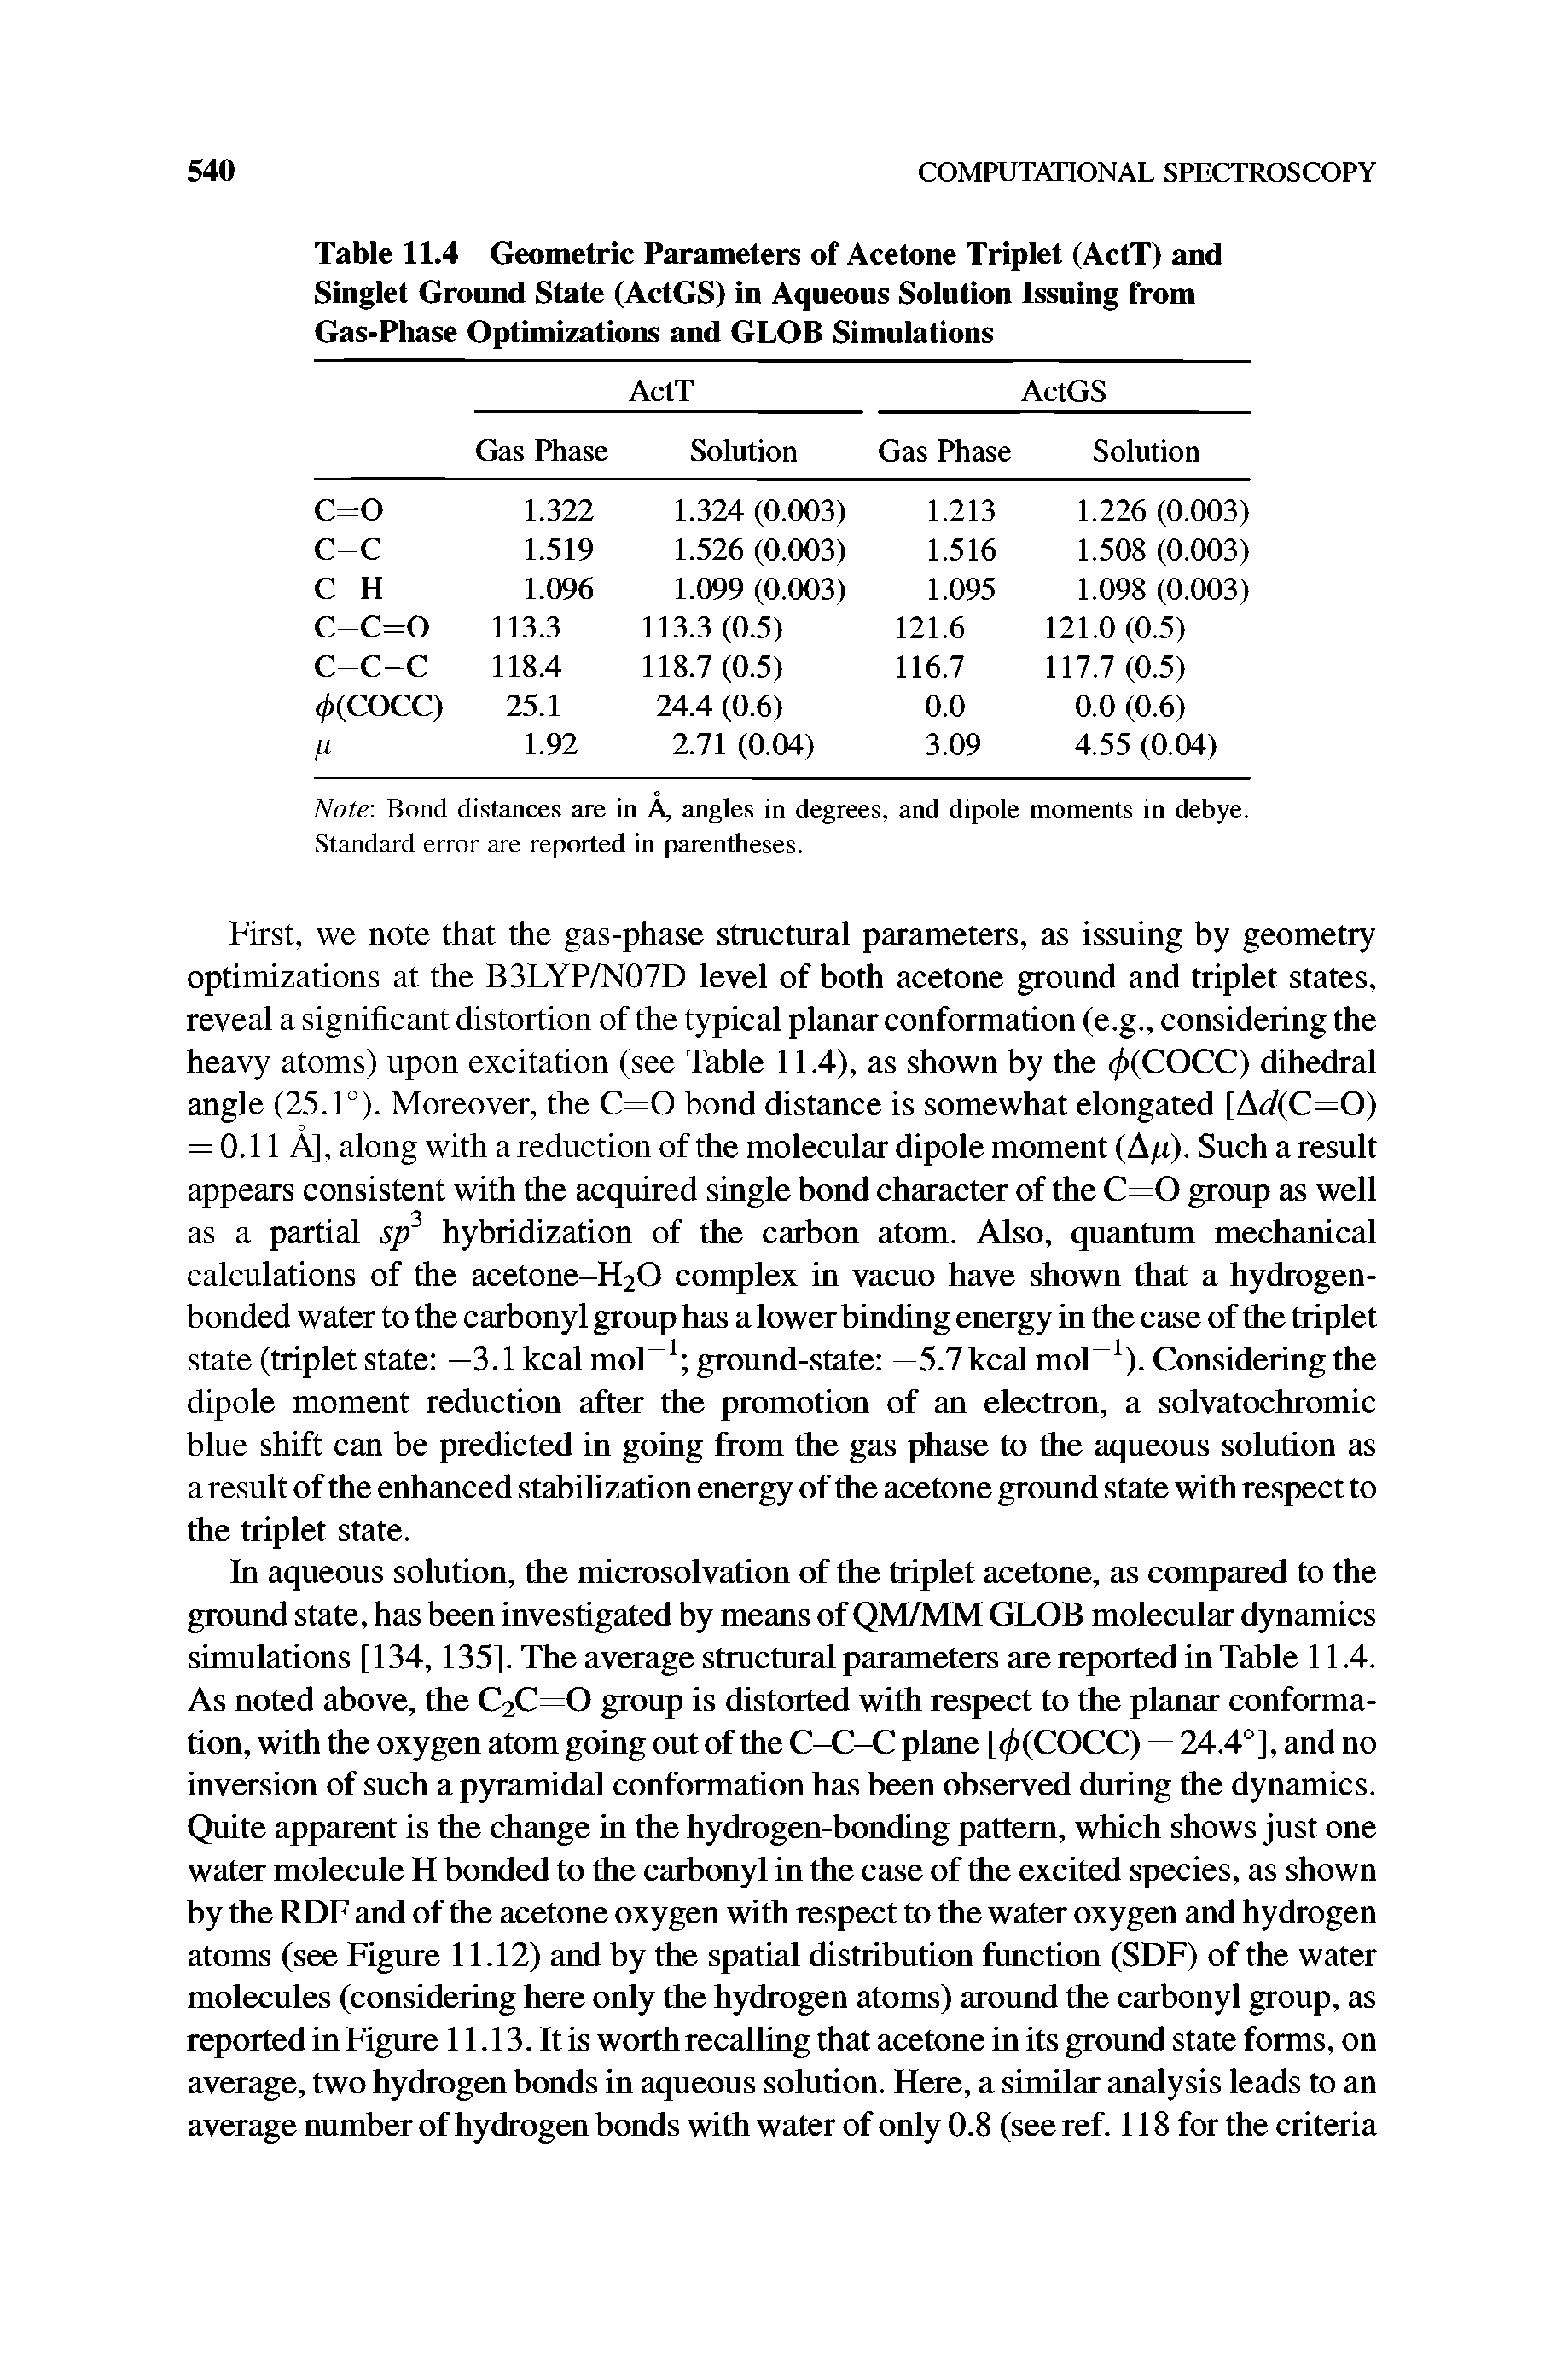 Table 11.4 Geometric Parameters of Acetone Triplet (ActT) and Singlet Ground State (ActGS) in Aqueous Solution Issuing from Gas-Phase Optimizations and GLOB Simulations...